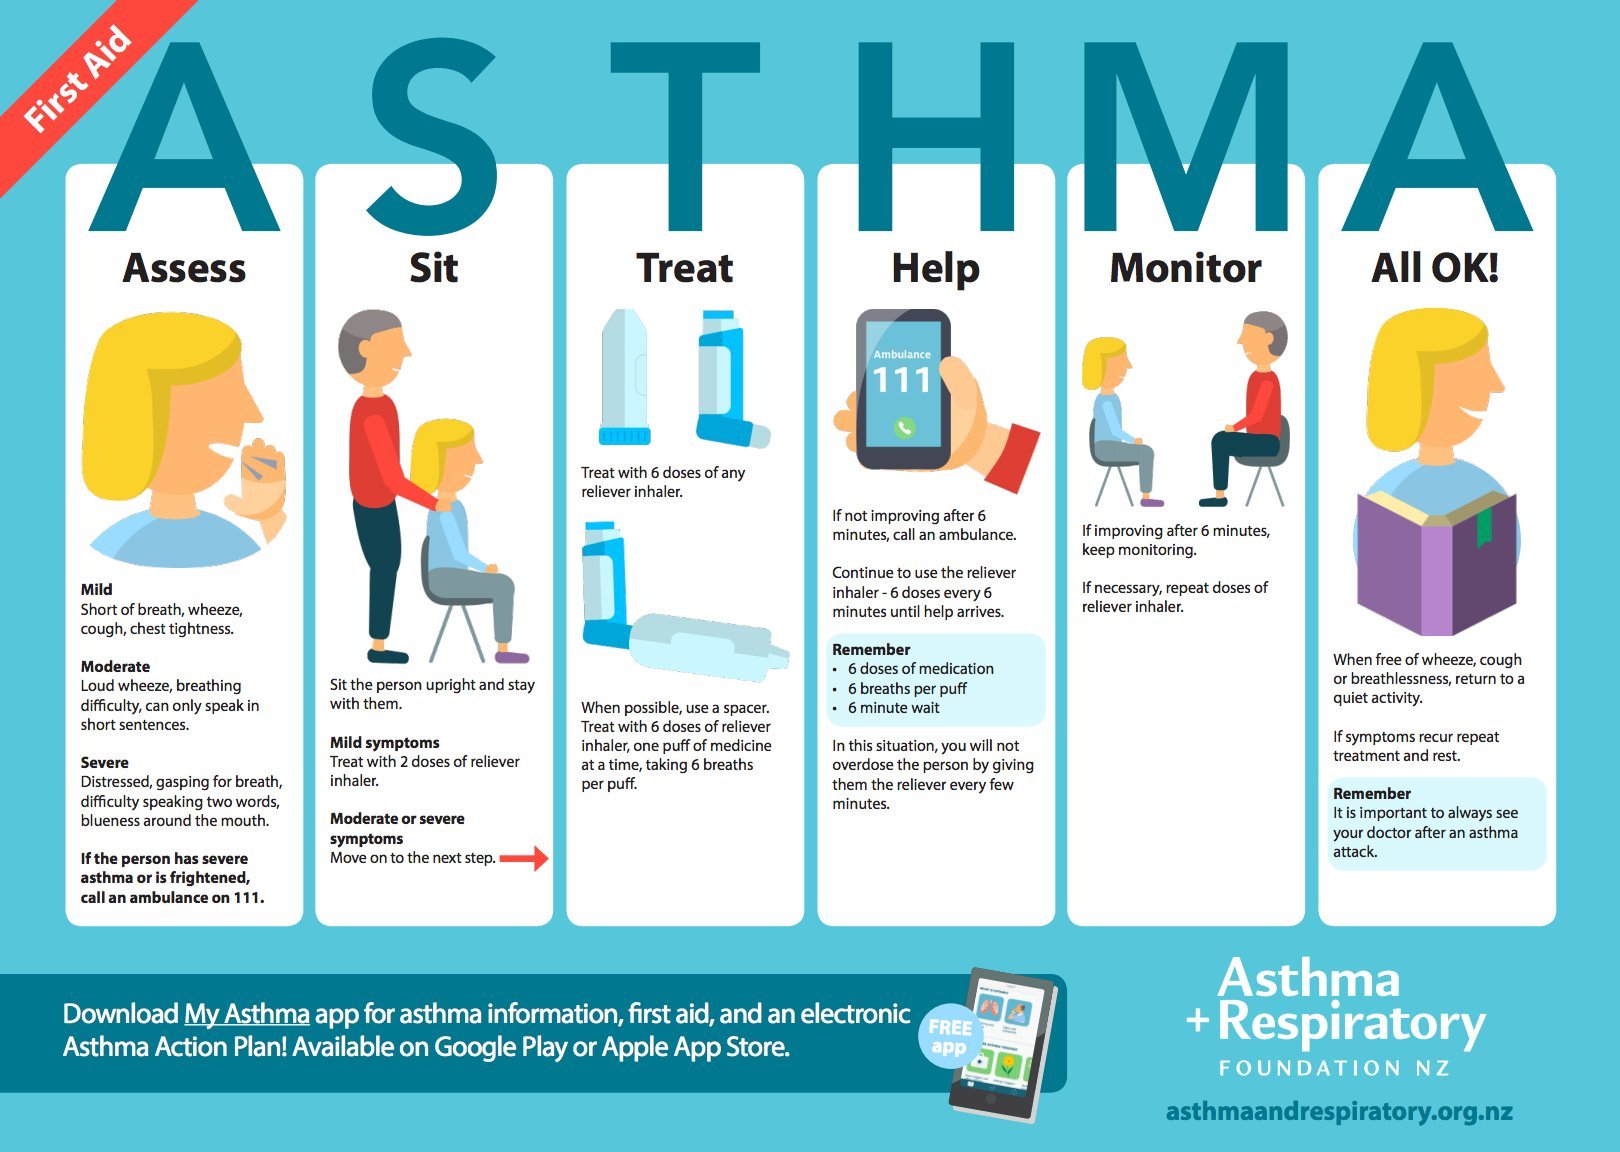 Asthma + Respiratory on Twitter: " Asthma First Aid